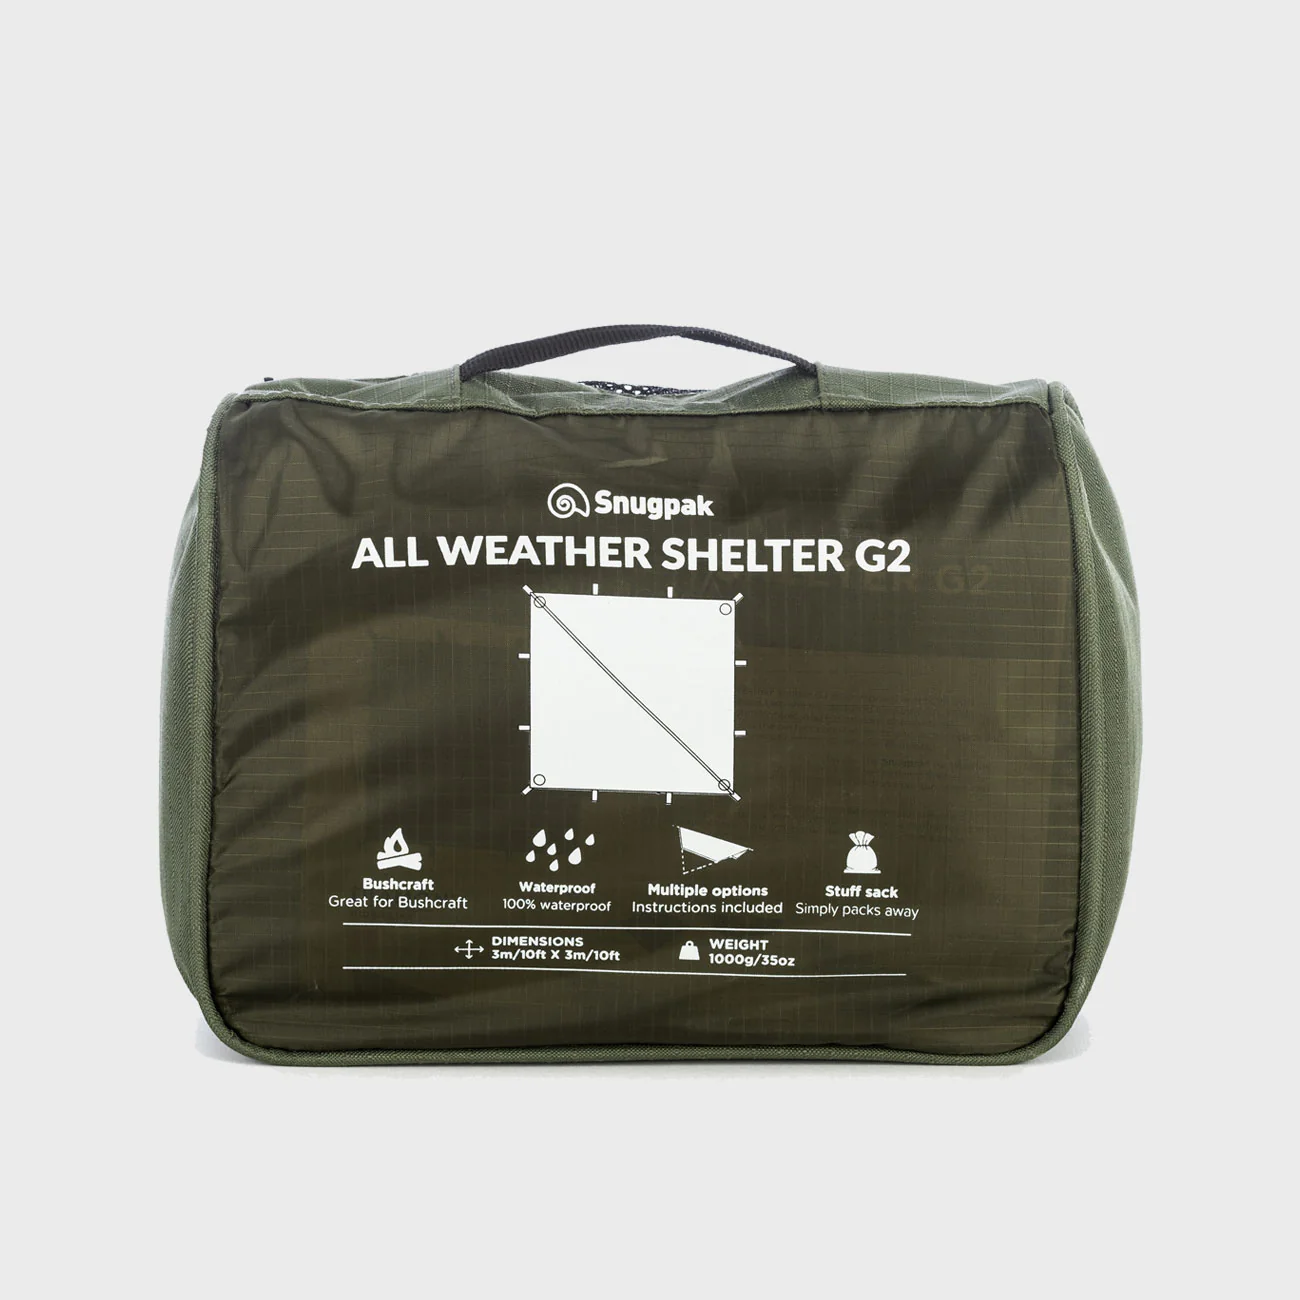 All Weather Shelter G2